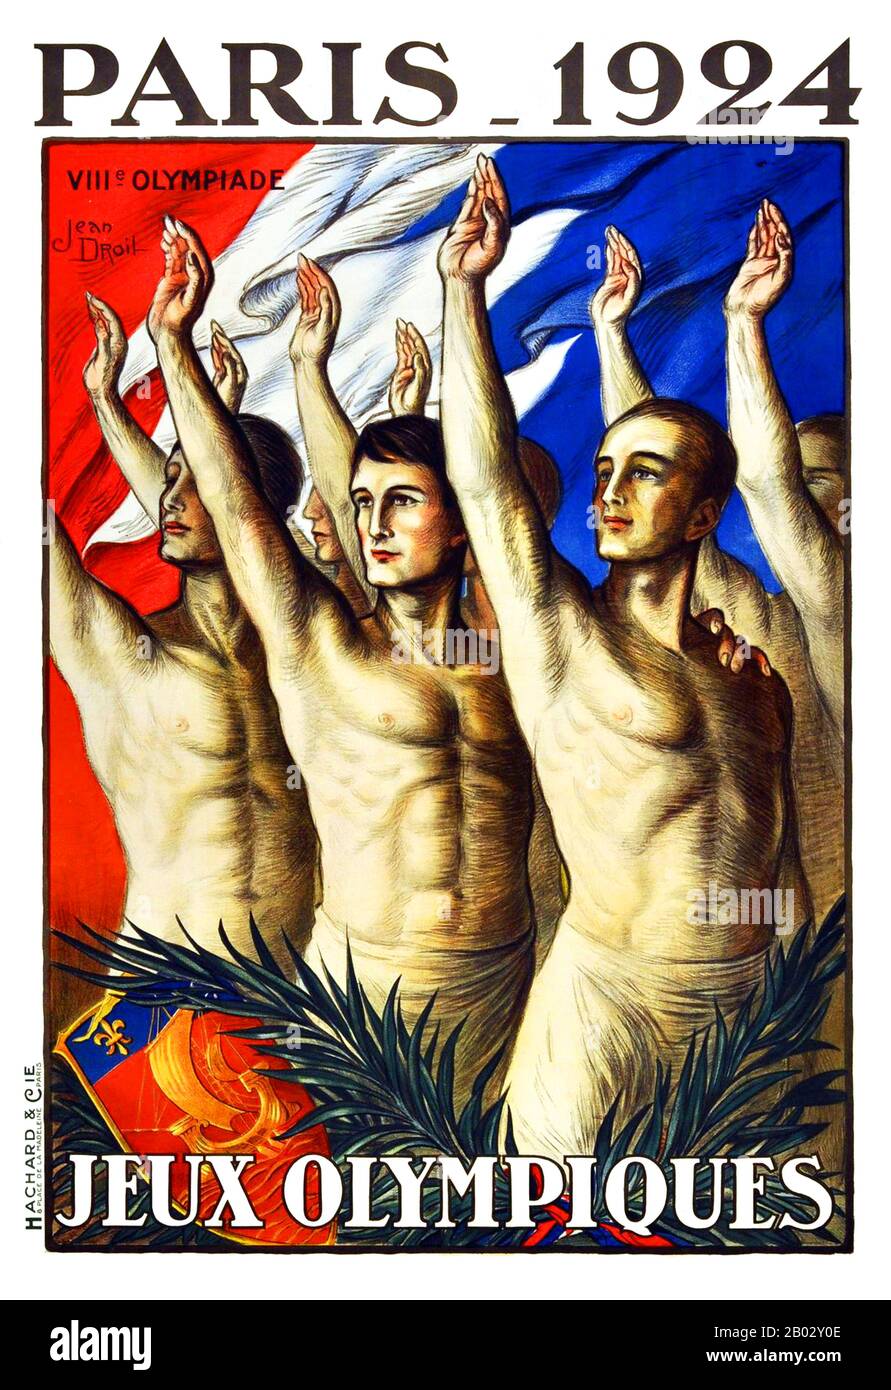 The 1924 Summer Olympics (French: Les Jeux olympiques d'été de 1924), officially known as the Games of the VIII Olympiad, were an international multi-sport event which was celebrated in 1924 in Paris, France.  It was the second time Paris hosted the games, after 1900. The selection process for the 1924 Summer Olympics consisted of six bids, and saw Paris selected ahead of Amsterdam, Barcelona, Los Angeles, Prague and Rome. Stock Photo